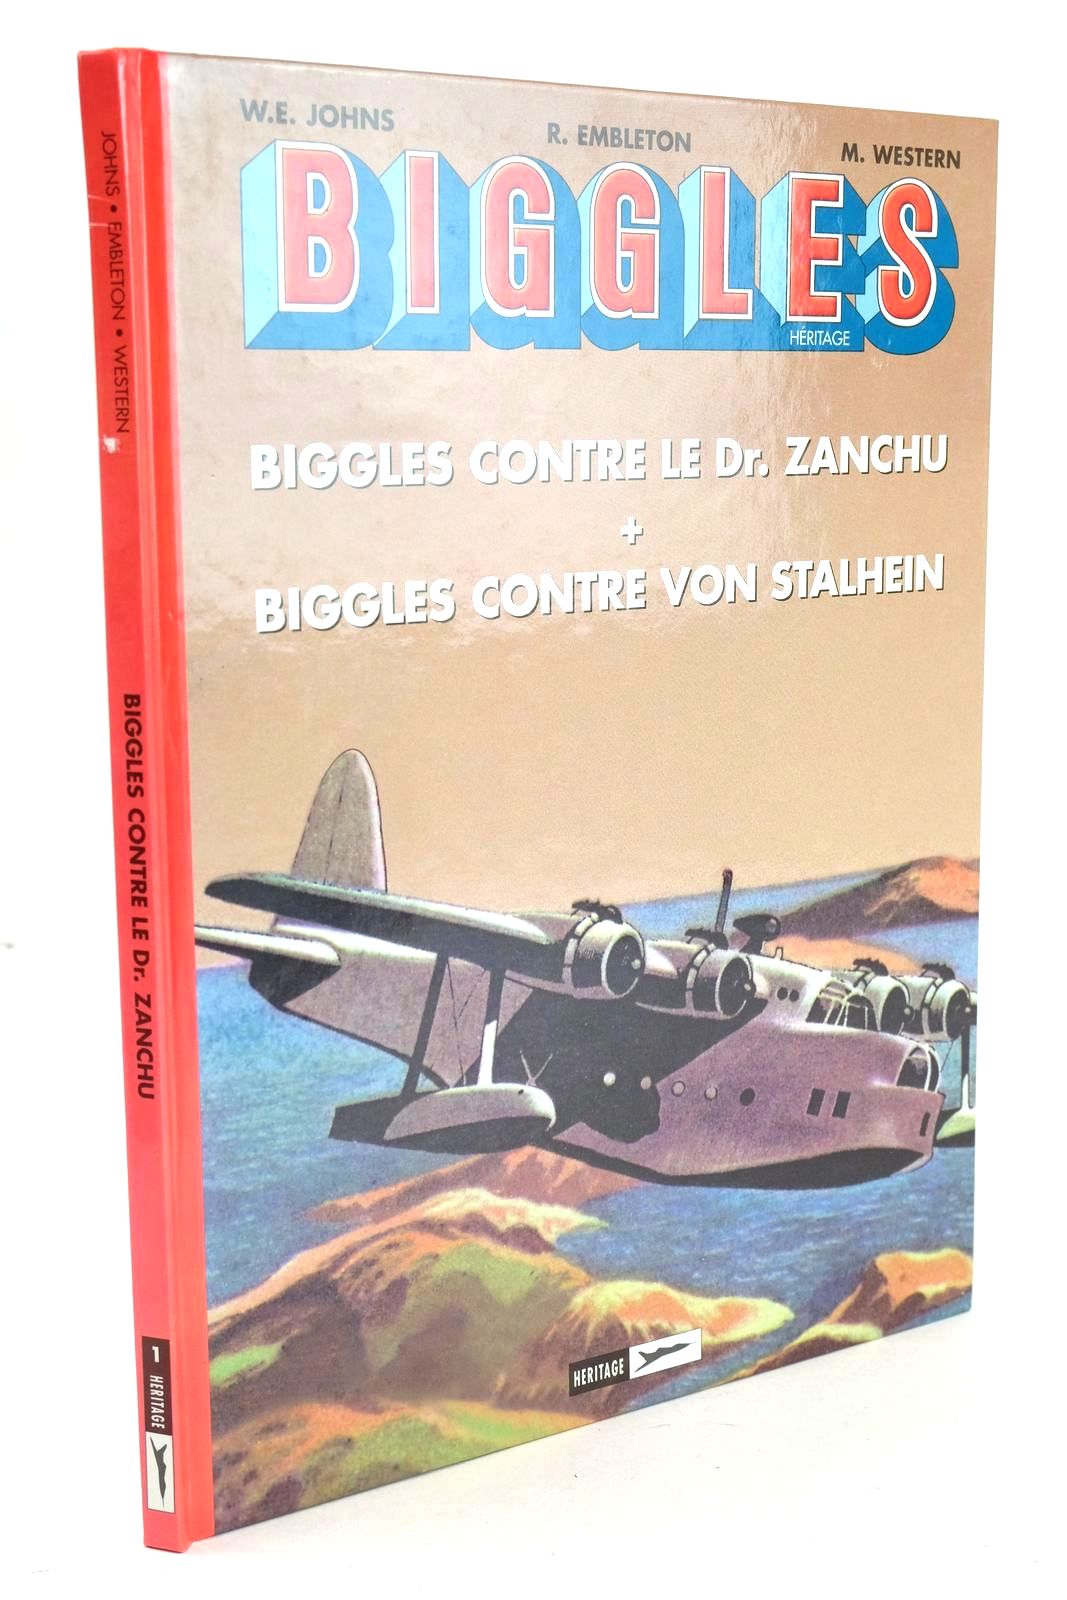 Photo of BIGGLES HERITAGE 1 - BIGGLES CONTRE LE DR. ZANCHU + BIGGLES CONTRE VON STALHEIN written by Johns, W.E. Embleton, Ron Western, Mike illustrated by Embleton, Ron Western, Mike published by Miklo (STOCK CODE: 1326324)  for sale by Stella & Rose's Books